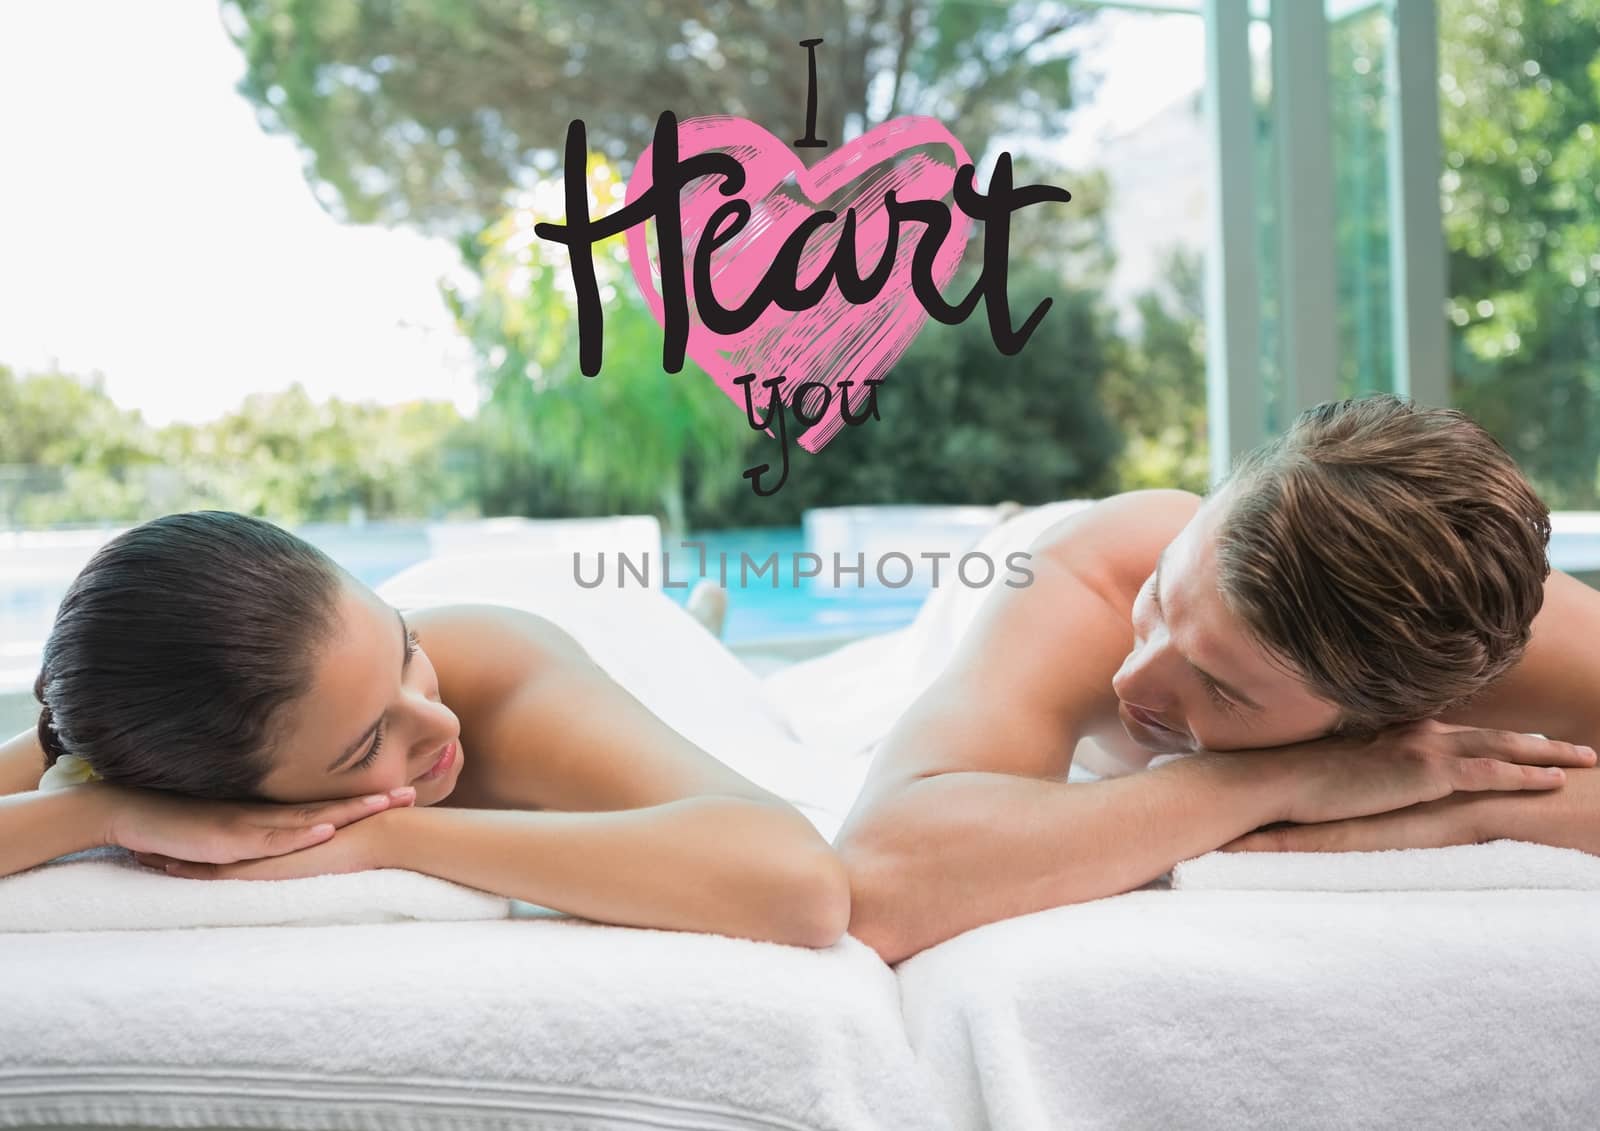 Composite image of love message and couple relaxing in spa after a beauty treatment